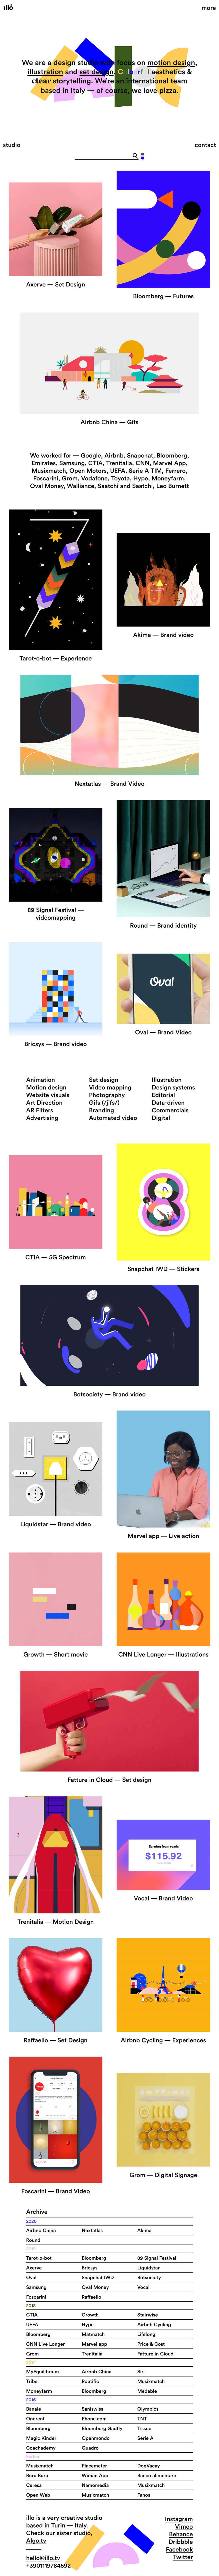 illo Landing Page Example: We are a design studio with focus on motion design, illustration and set design. Colourful aesthetics & clear storytelling. We’re an international team based in Italy — of course, we love pizza.